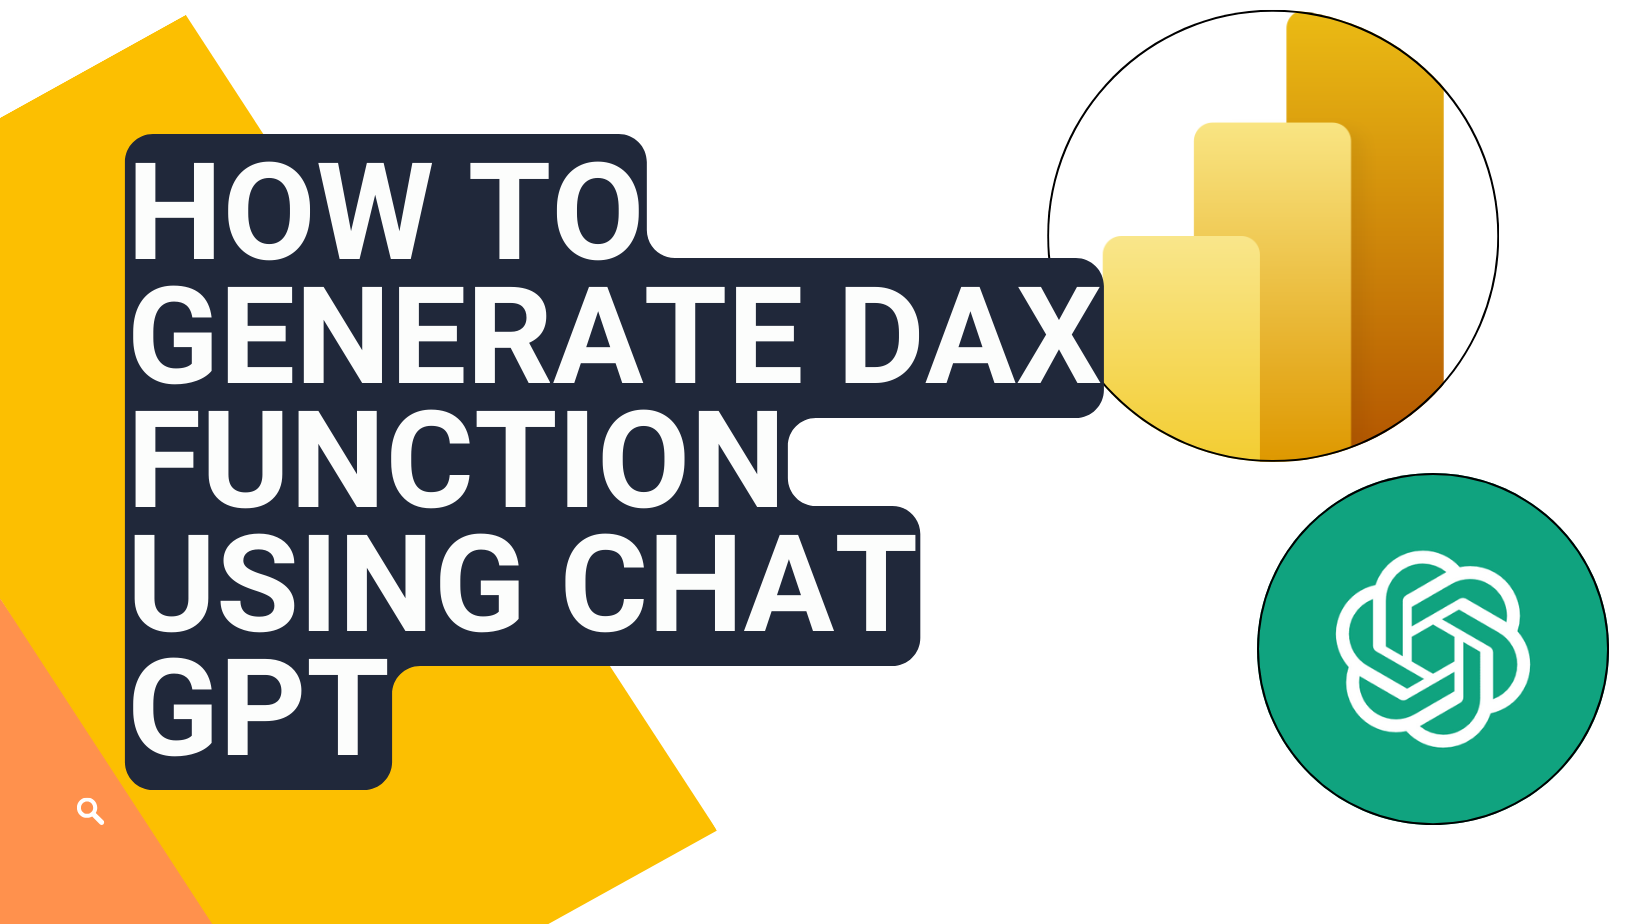 How to generate DAX Function using Chat GPT